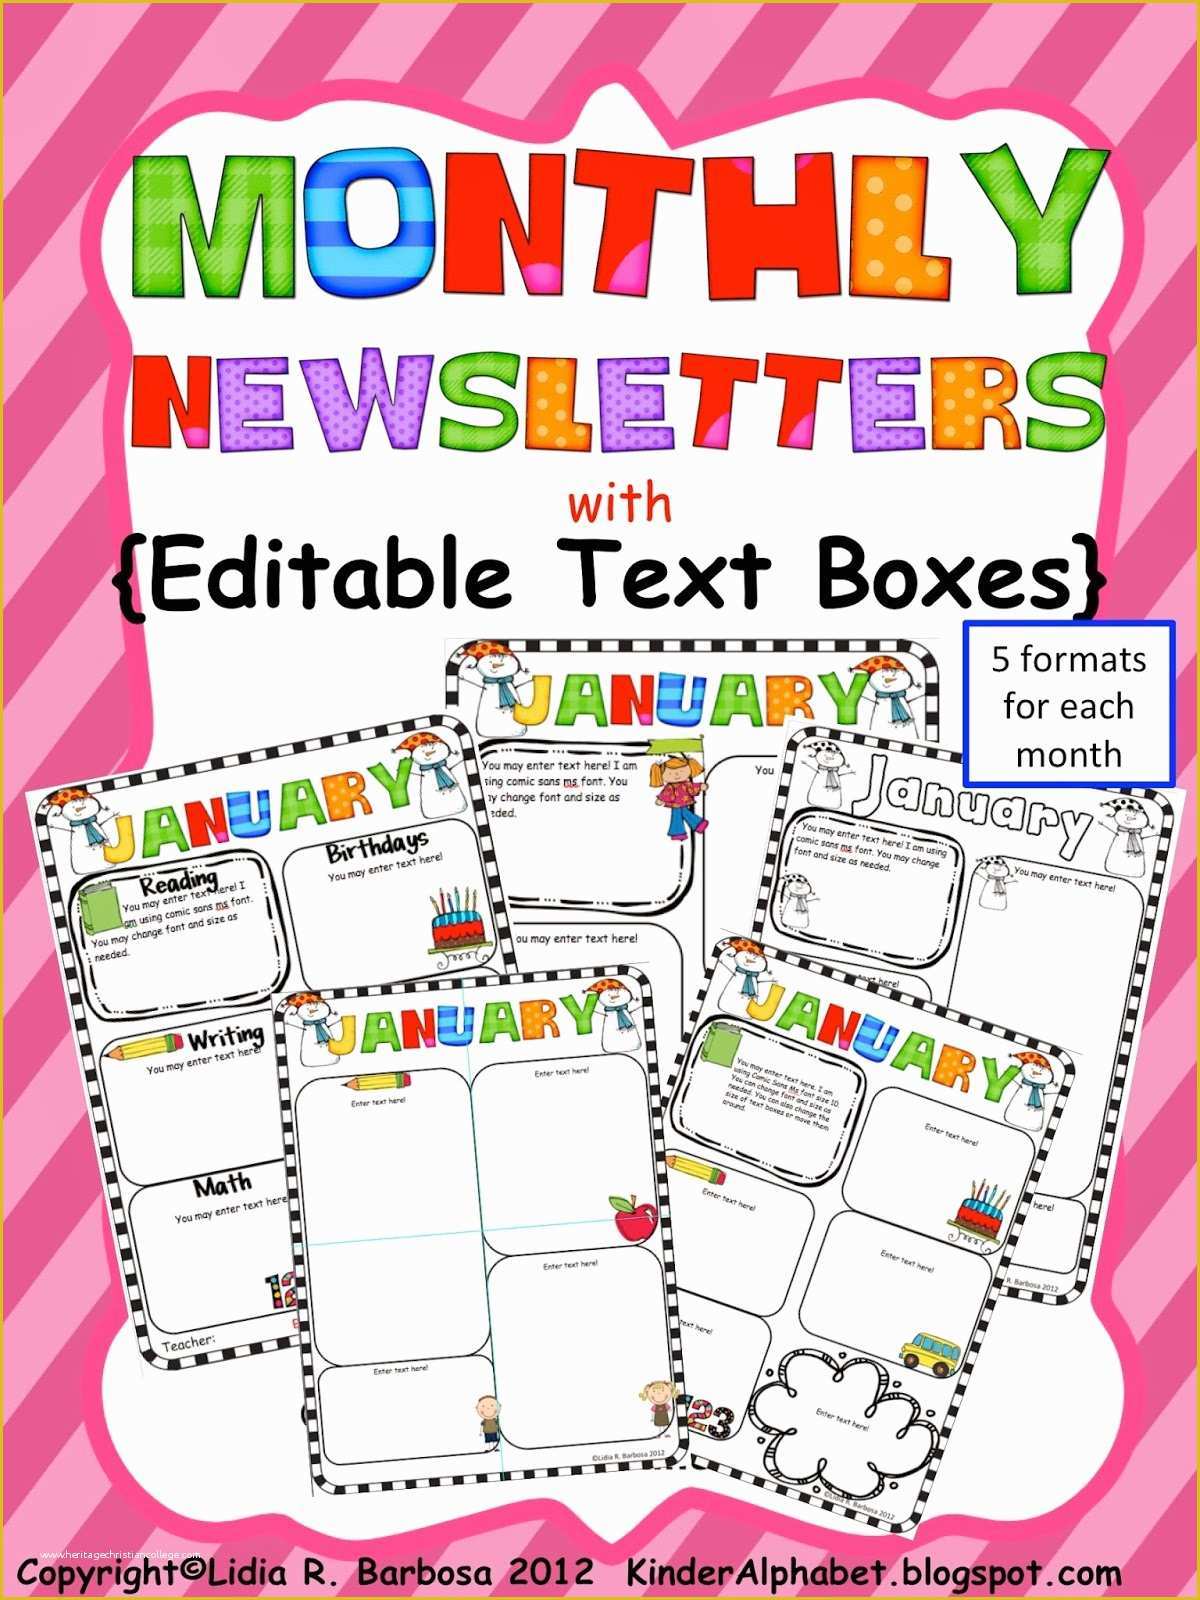 Free Editable Newsletter Templates Of Kinder Alphabet — Teacher Resources In English and Spanish